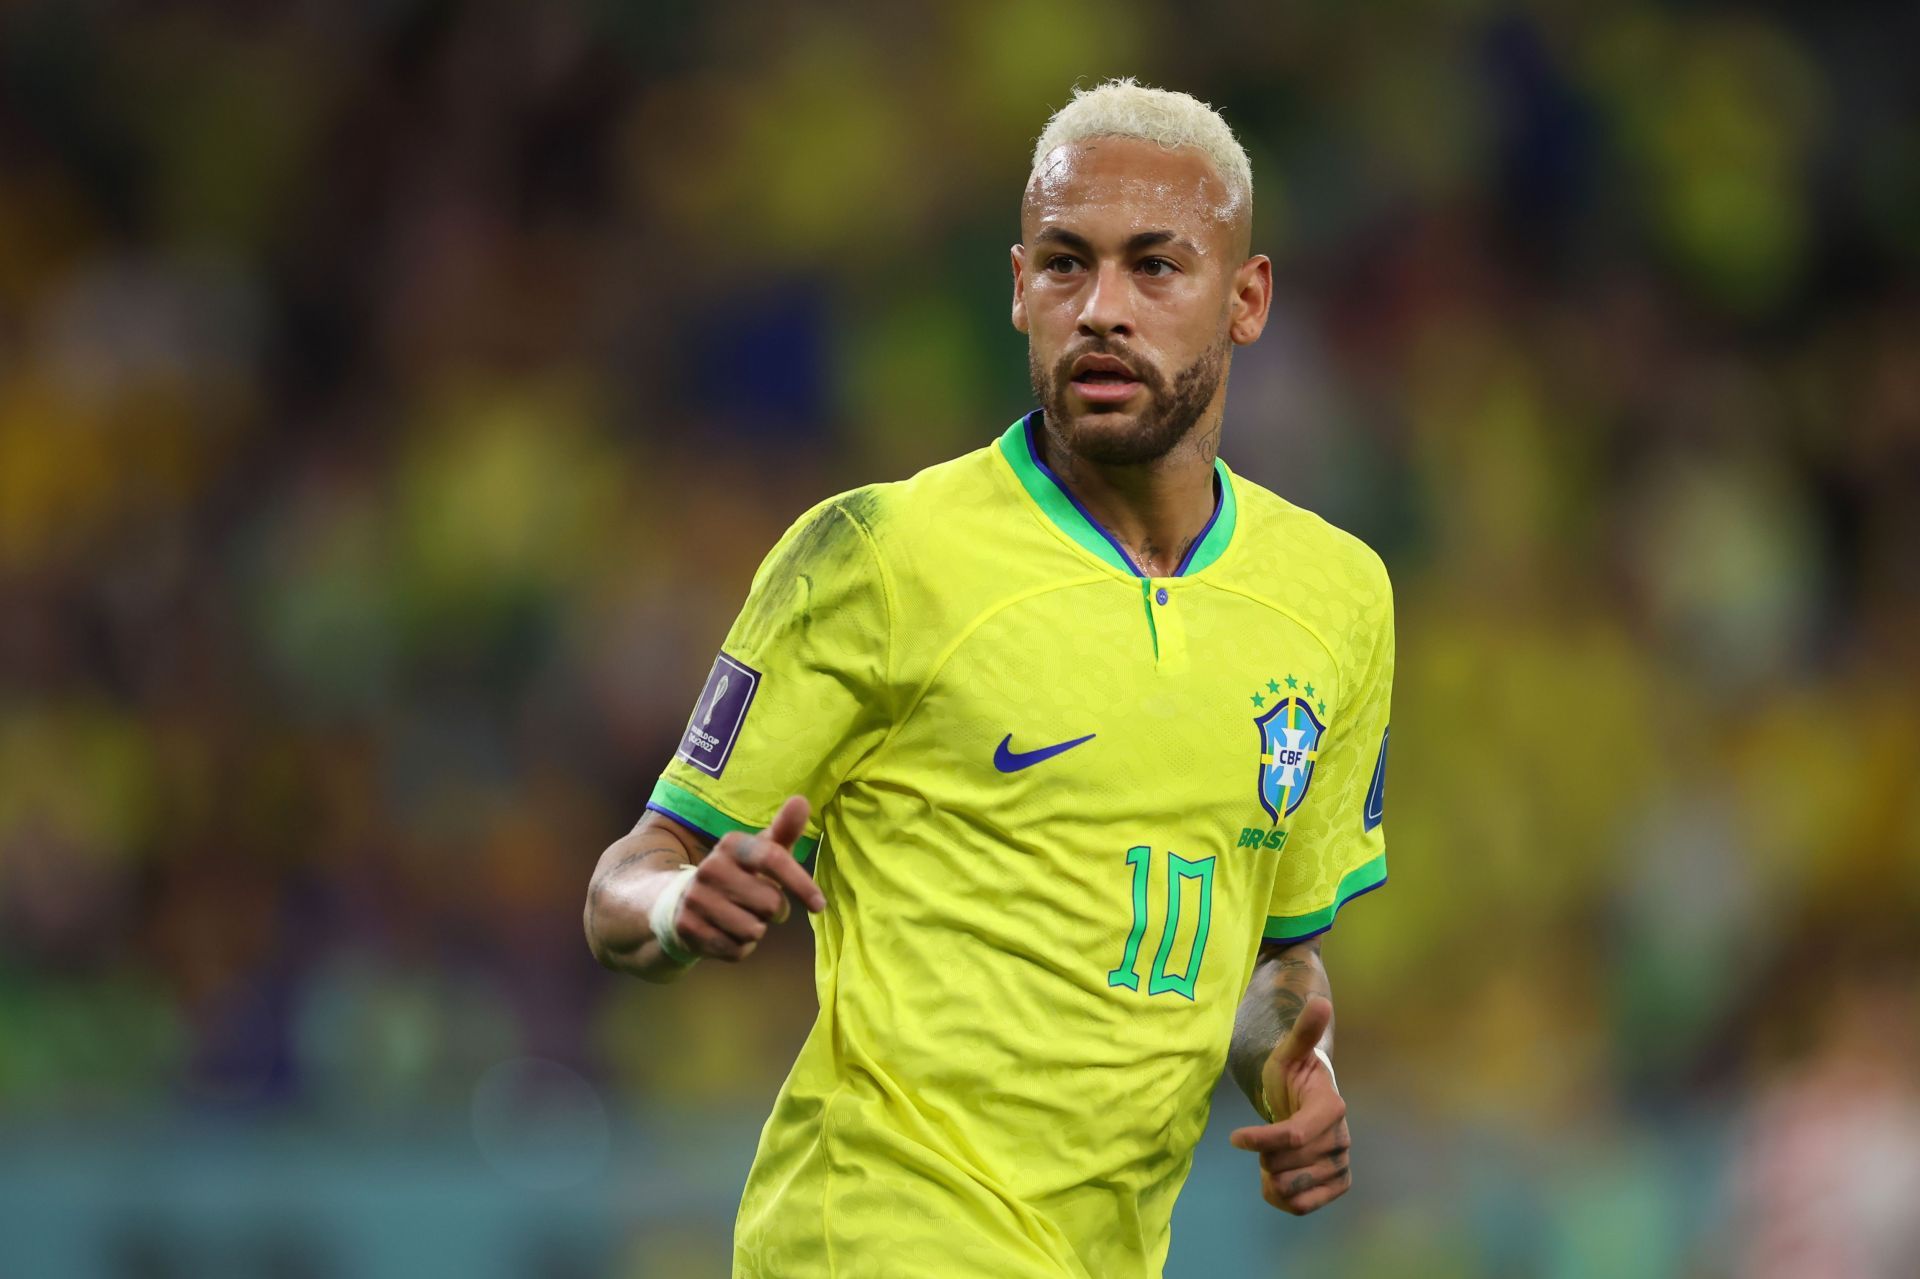 Neymar wants to continue his association with his national team.